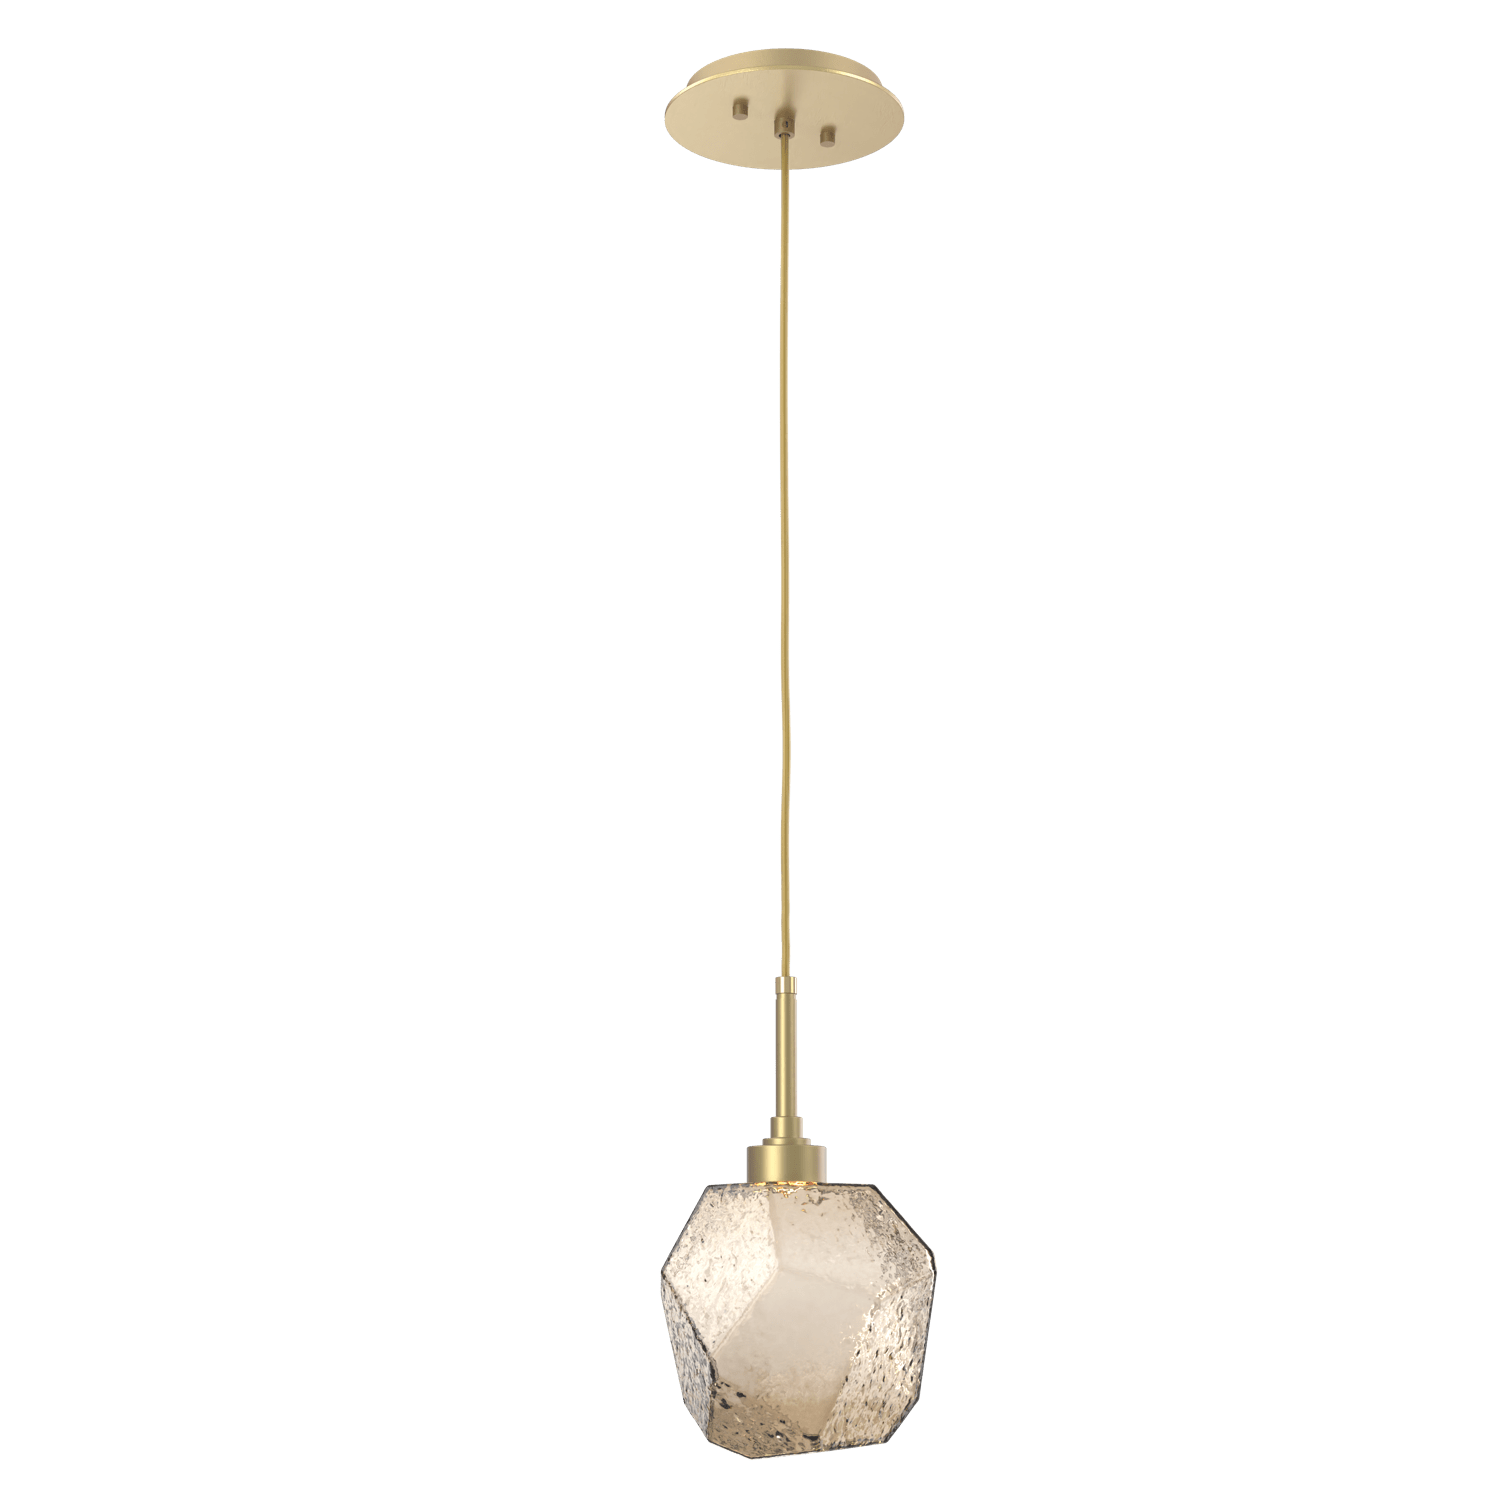 LAB0039-01-GB-B-Hammerton-Studio-Gem-pendant-light-with-gilded-brass-finish-and-bronze-blown-glass-shades-and-LED-lamping